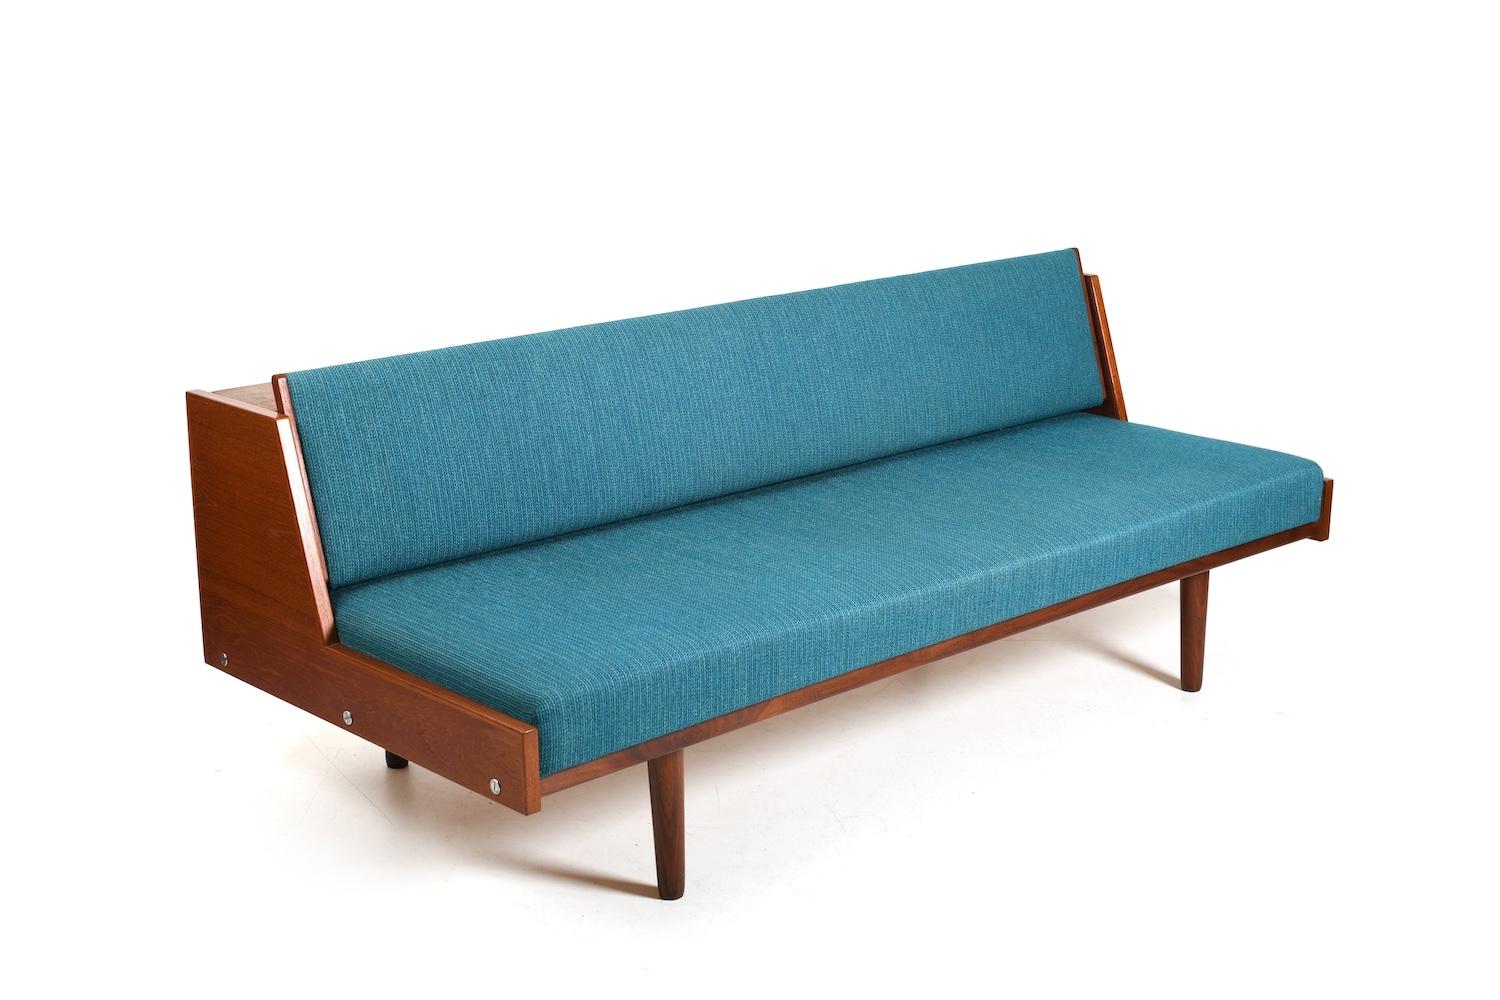 Daybed GE-258 in teak by Hans J. Wegner for Getama 1954.. Early production with round legs, fixed matress and original blue/green wool fabric.

Note: The mattress is now soft. We would be happy to renew them upon request. Please ask for a price.